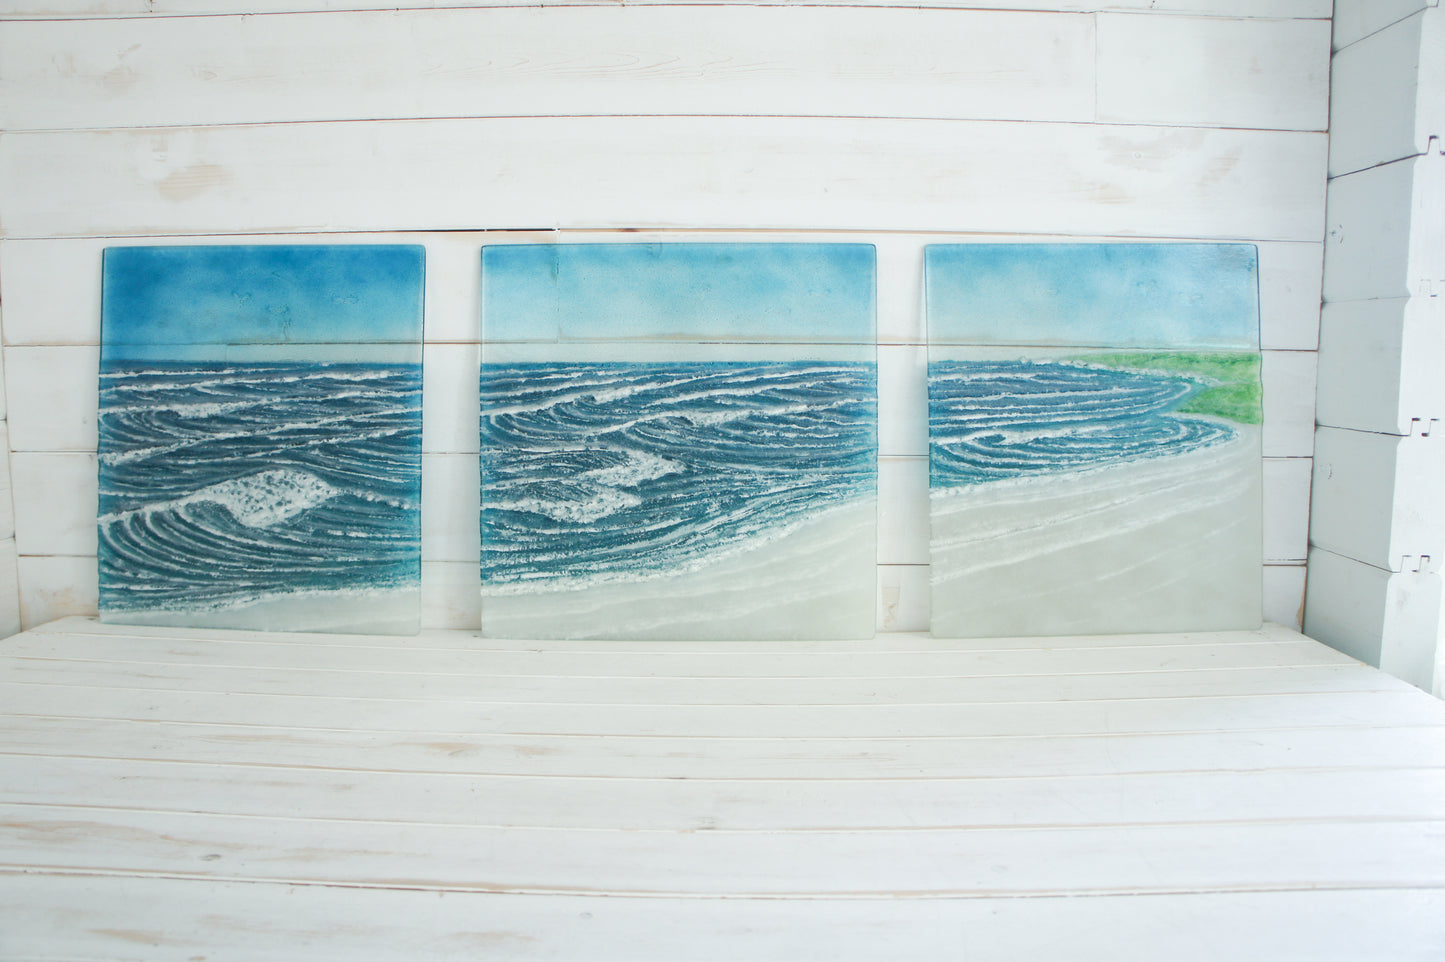 Triptych Coastal Wave Wall Panels Poole - Left&Right 35x40cm (14x16")/Middle 40x40cm (16x16") with 9 fixings